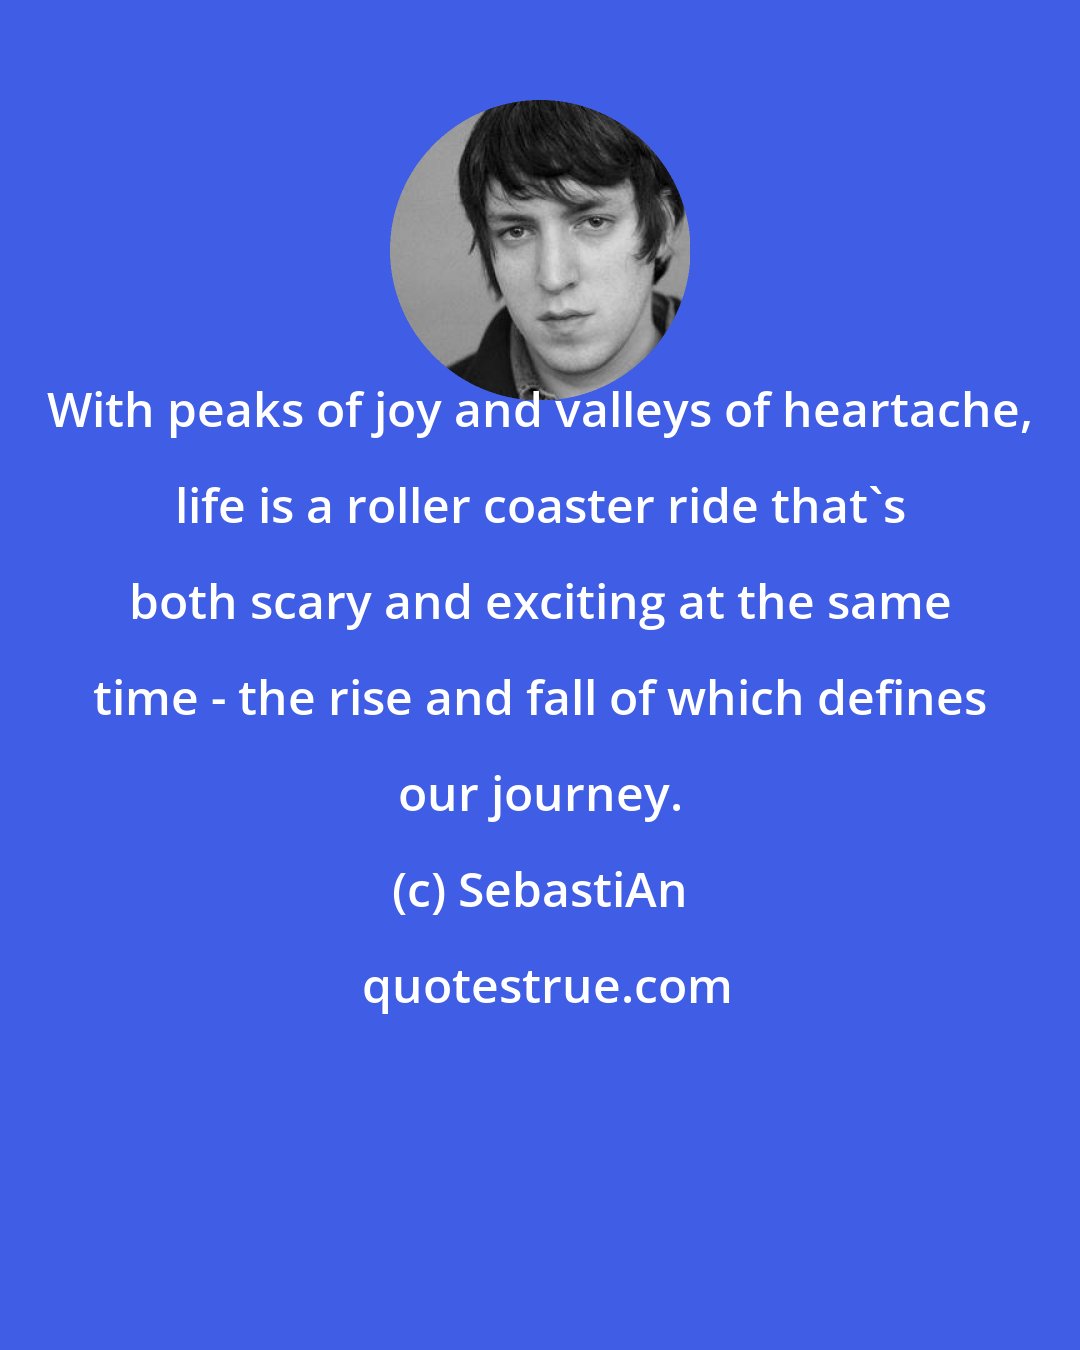 SebastiAn: With peaks of joy and valleys of heartache, life is a roller coaster ride that's both scary and exciting at the same time - the rise and fall of which defines our journey.